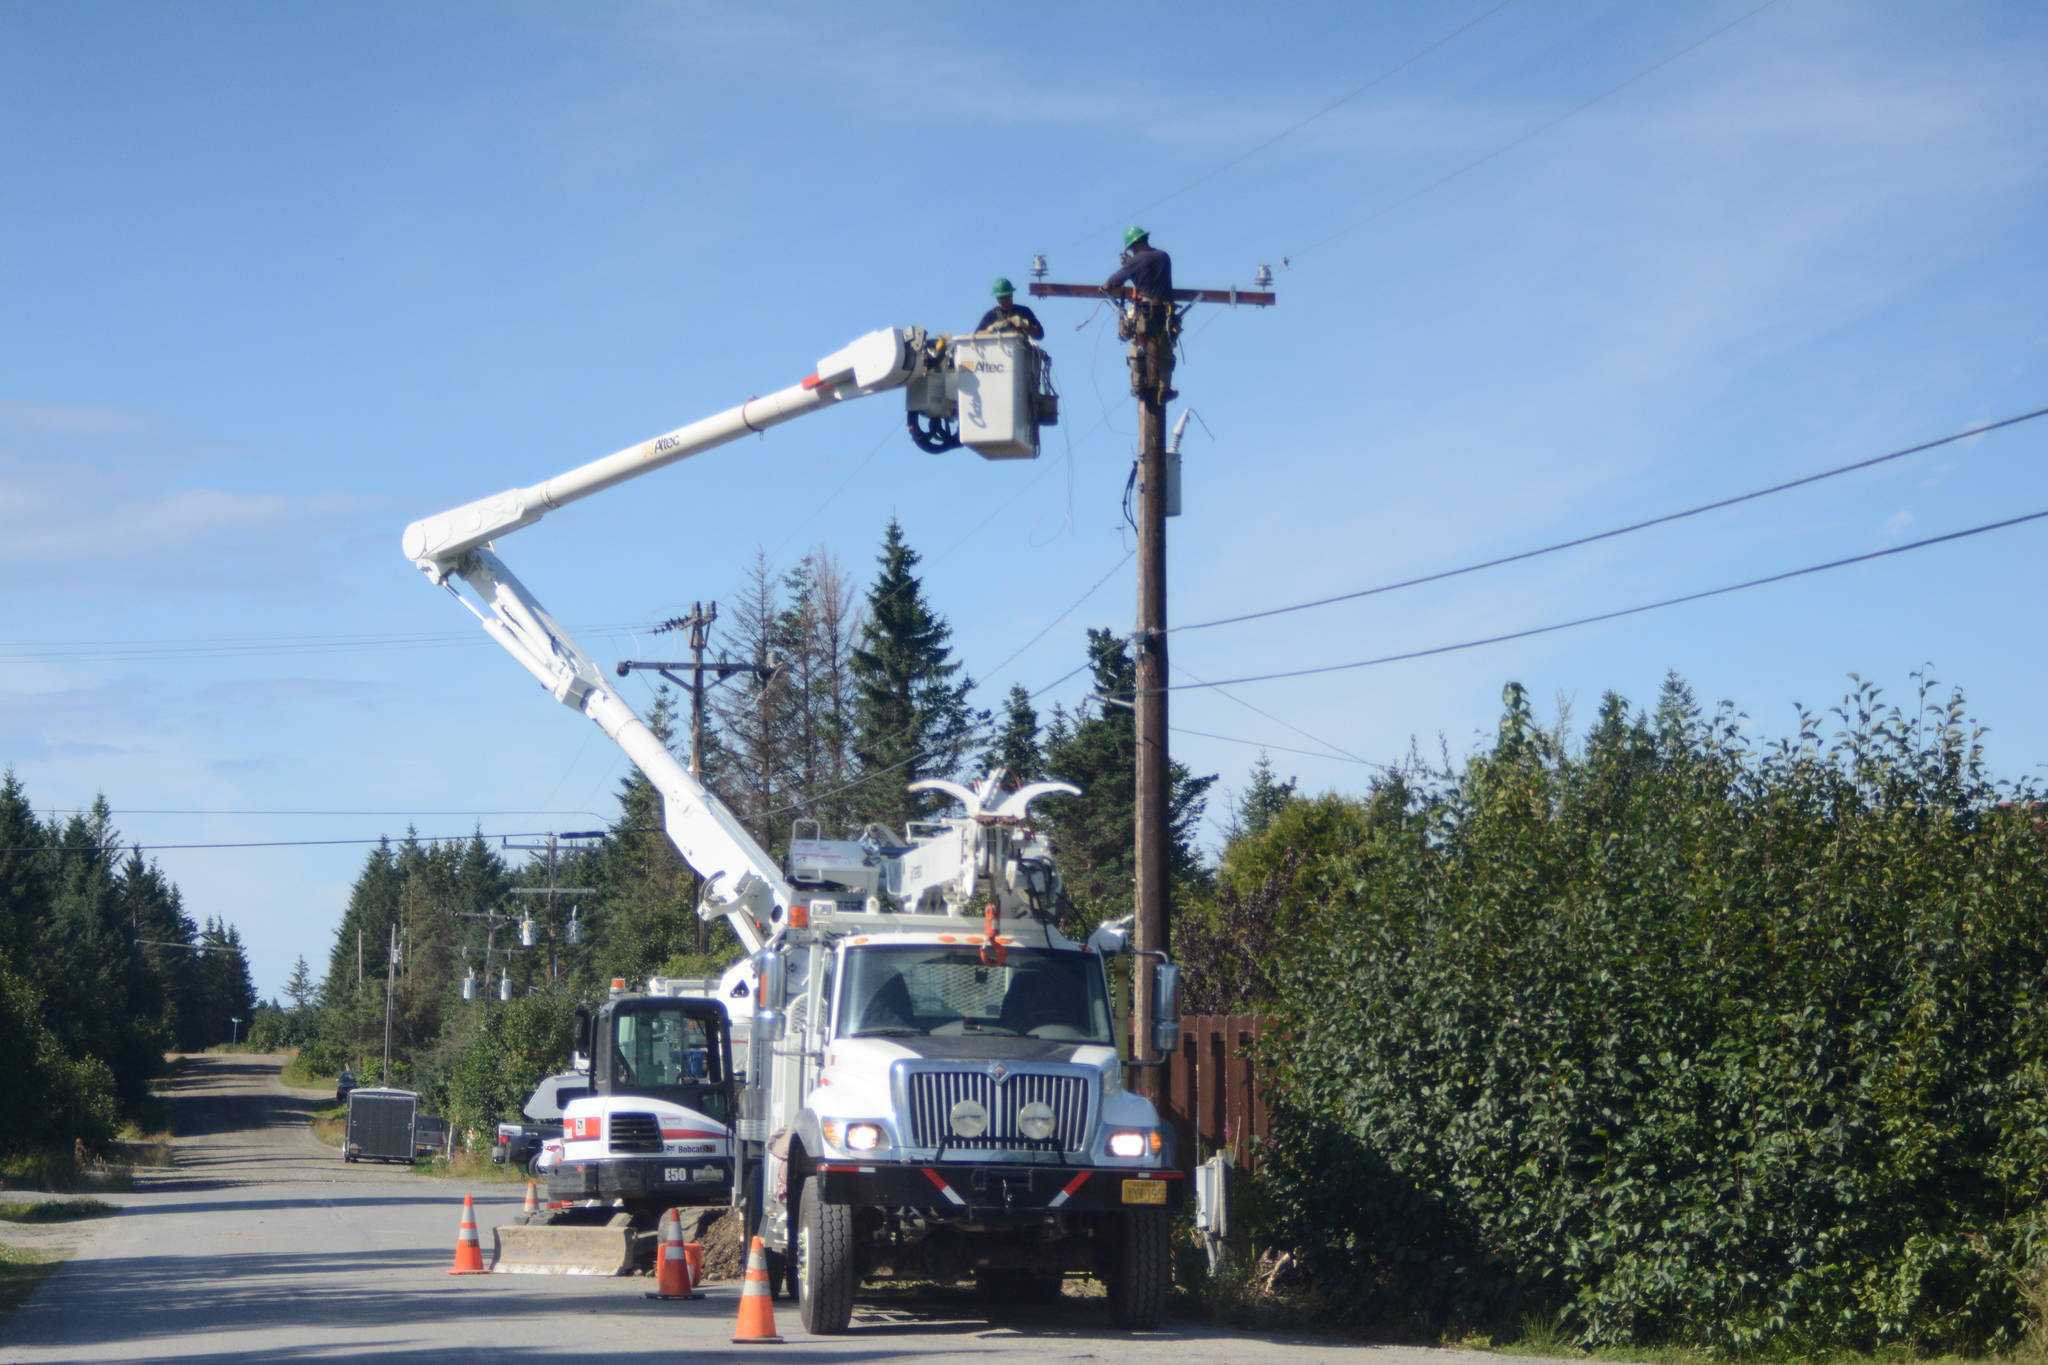 Homer Electric Association crews work on a powerline on Lake Street in Homer, Alaska, on Aug. 17, 2018. (Photo by Michael Armstrong/Homer News)